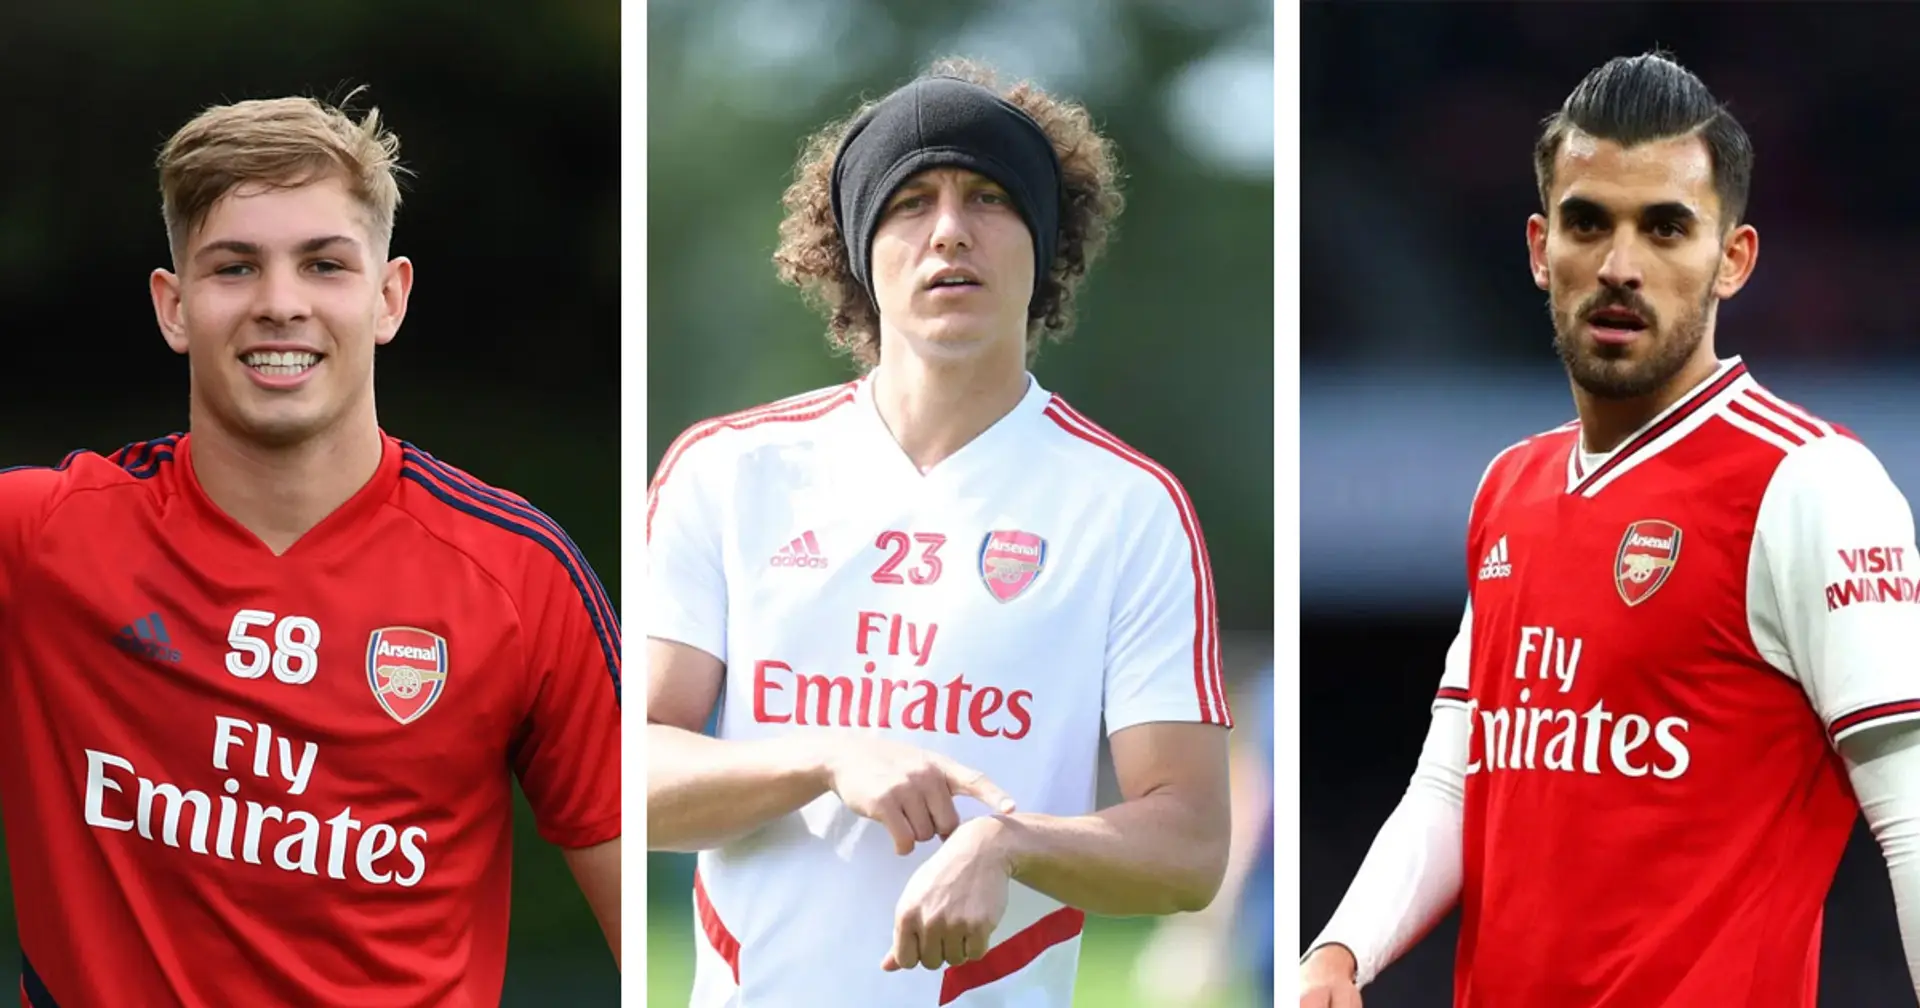 Time's up: David Luiz & 10 more players whose fate will be decided on June 23